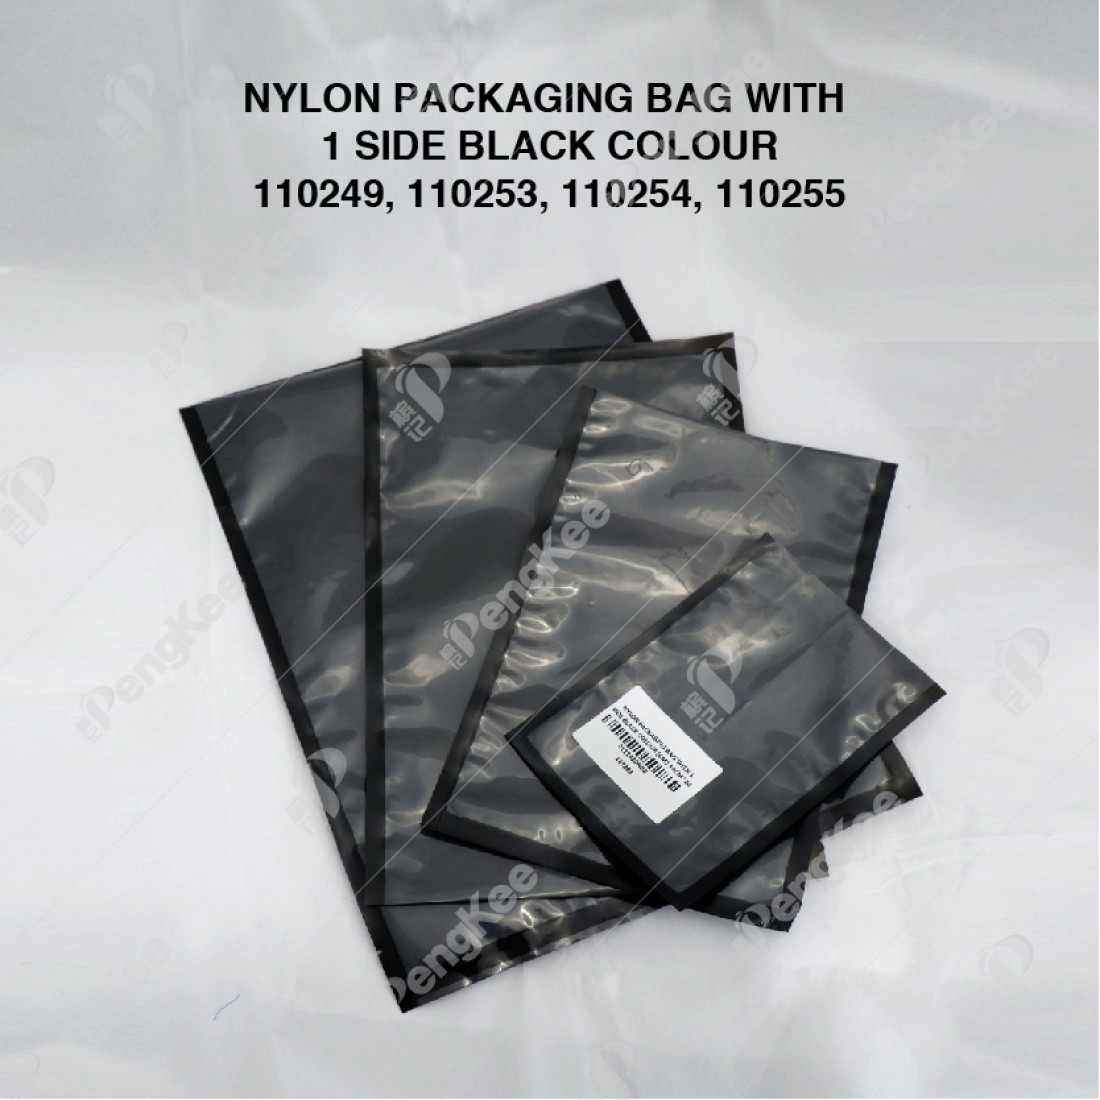 NYLON PACKAGING BAG WITH 1 SIDE BLACK COLOUR (CM)